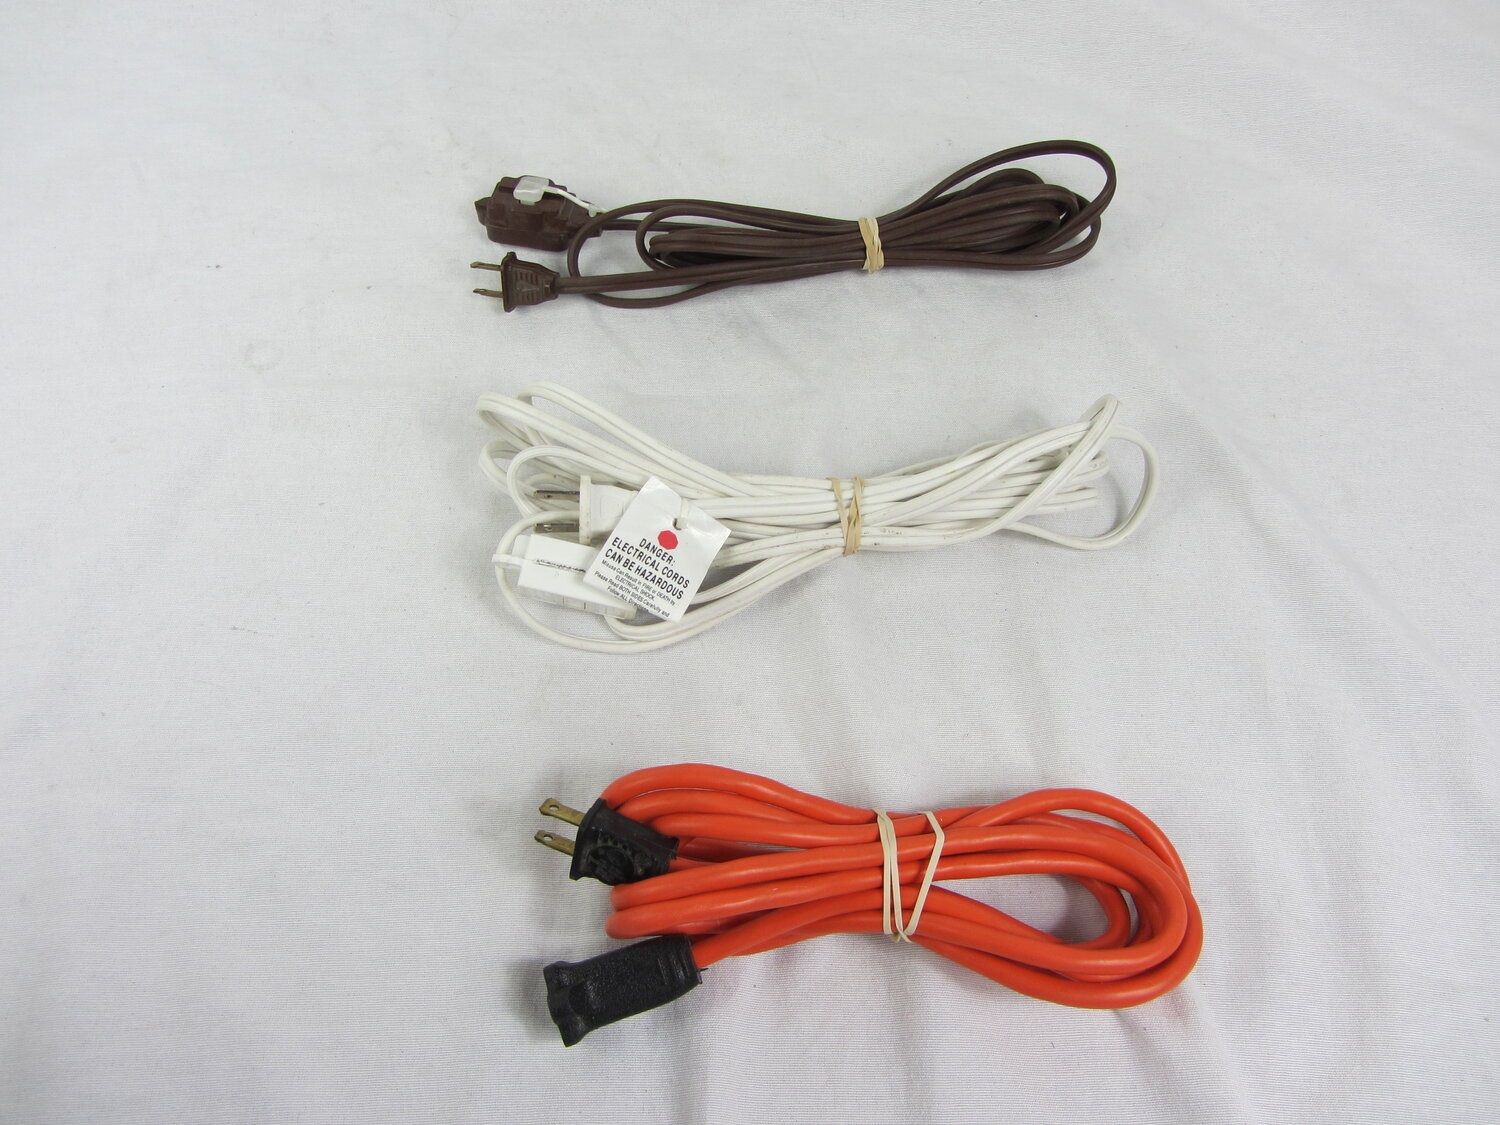 How To Wrap Rope Around Electrical Cord